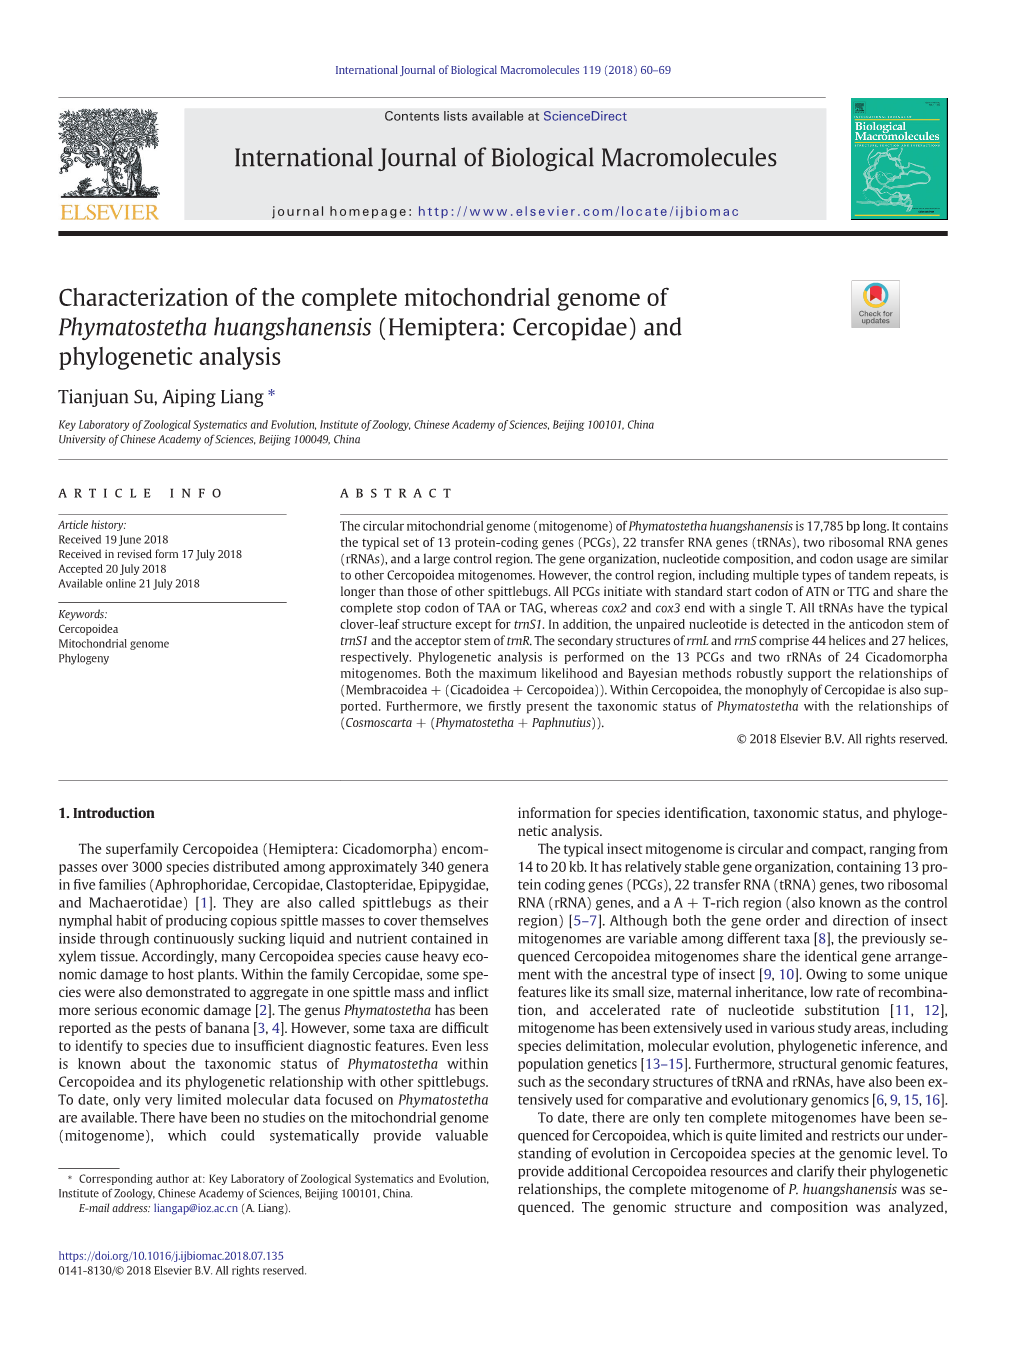 Characterization of the Complete Mitochondrial Genome of Phymatostetha Huangshanensis (Hemiptera: Cercopidae) and Phylogenetic Analysis